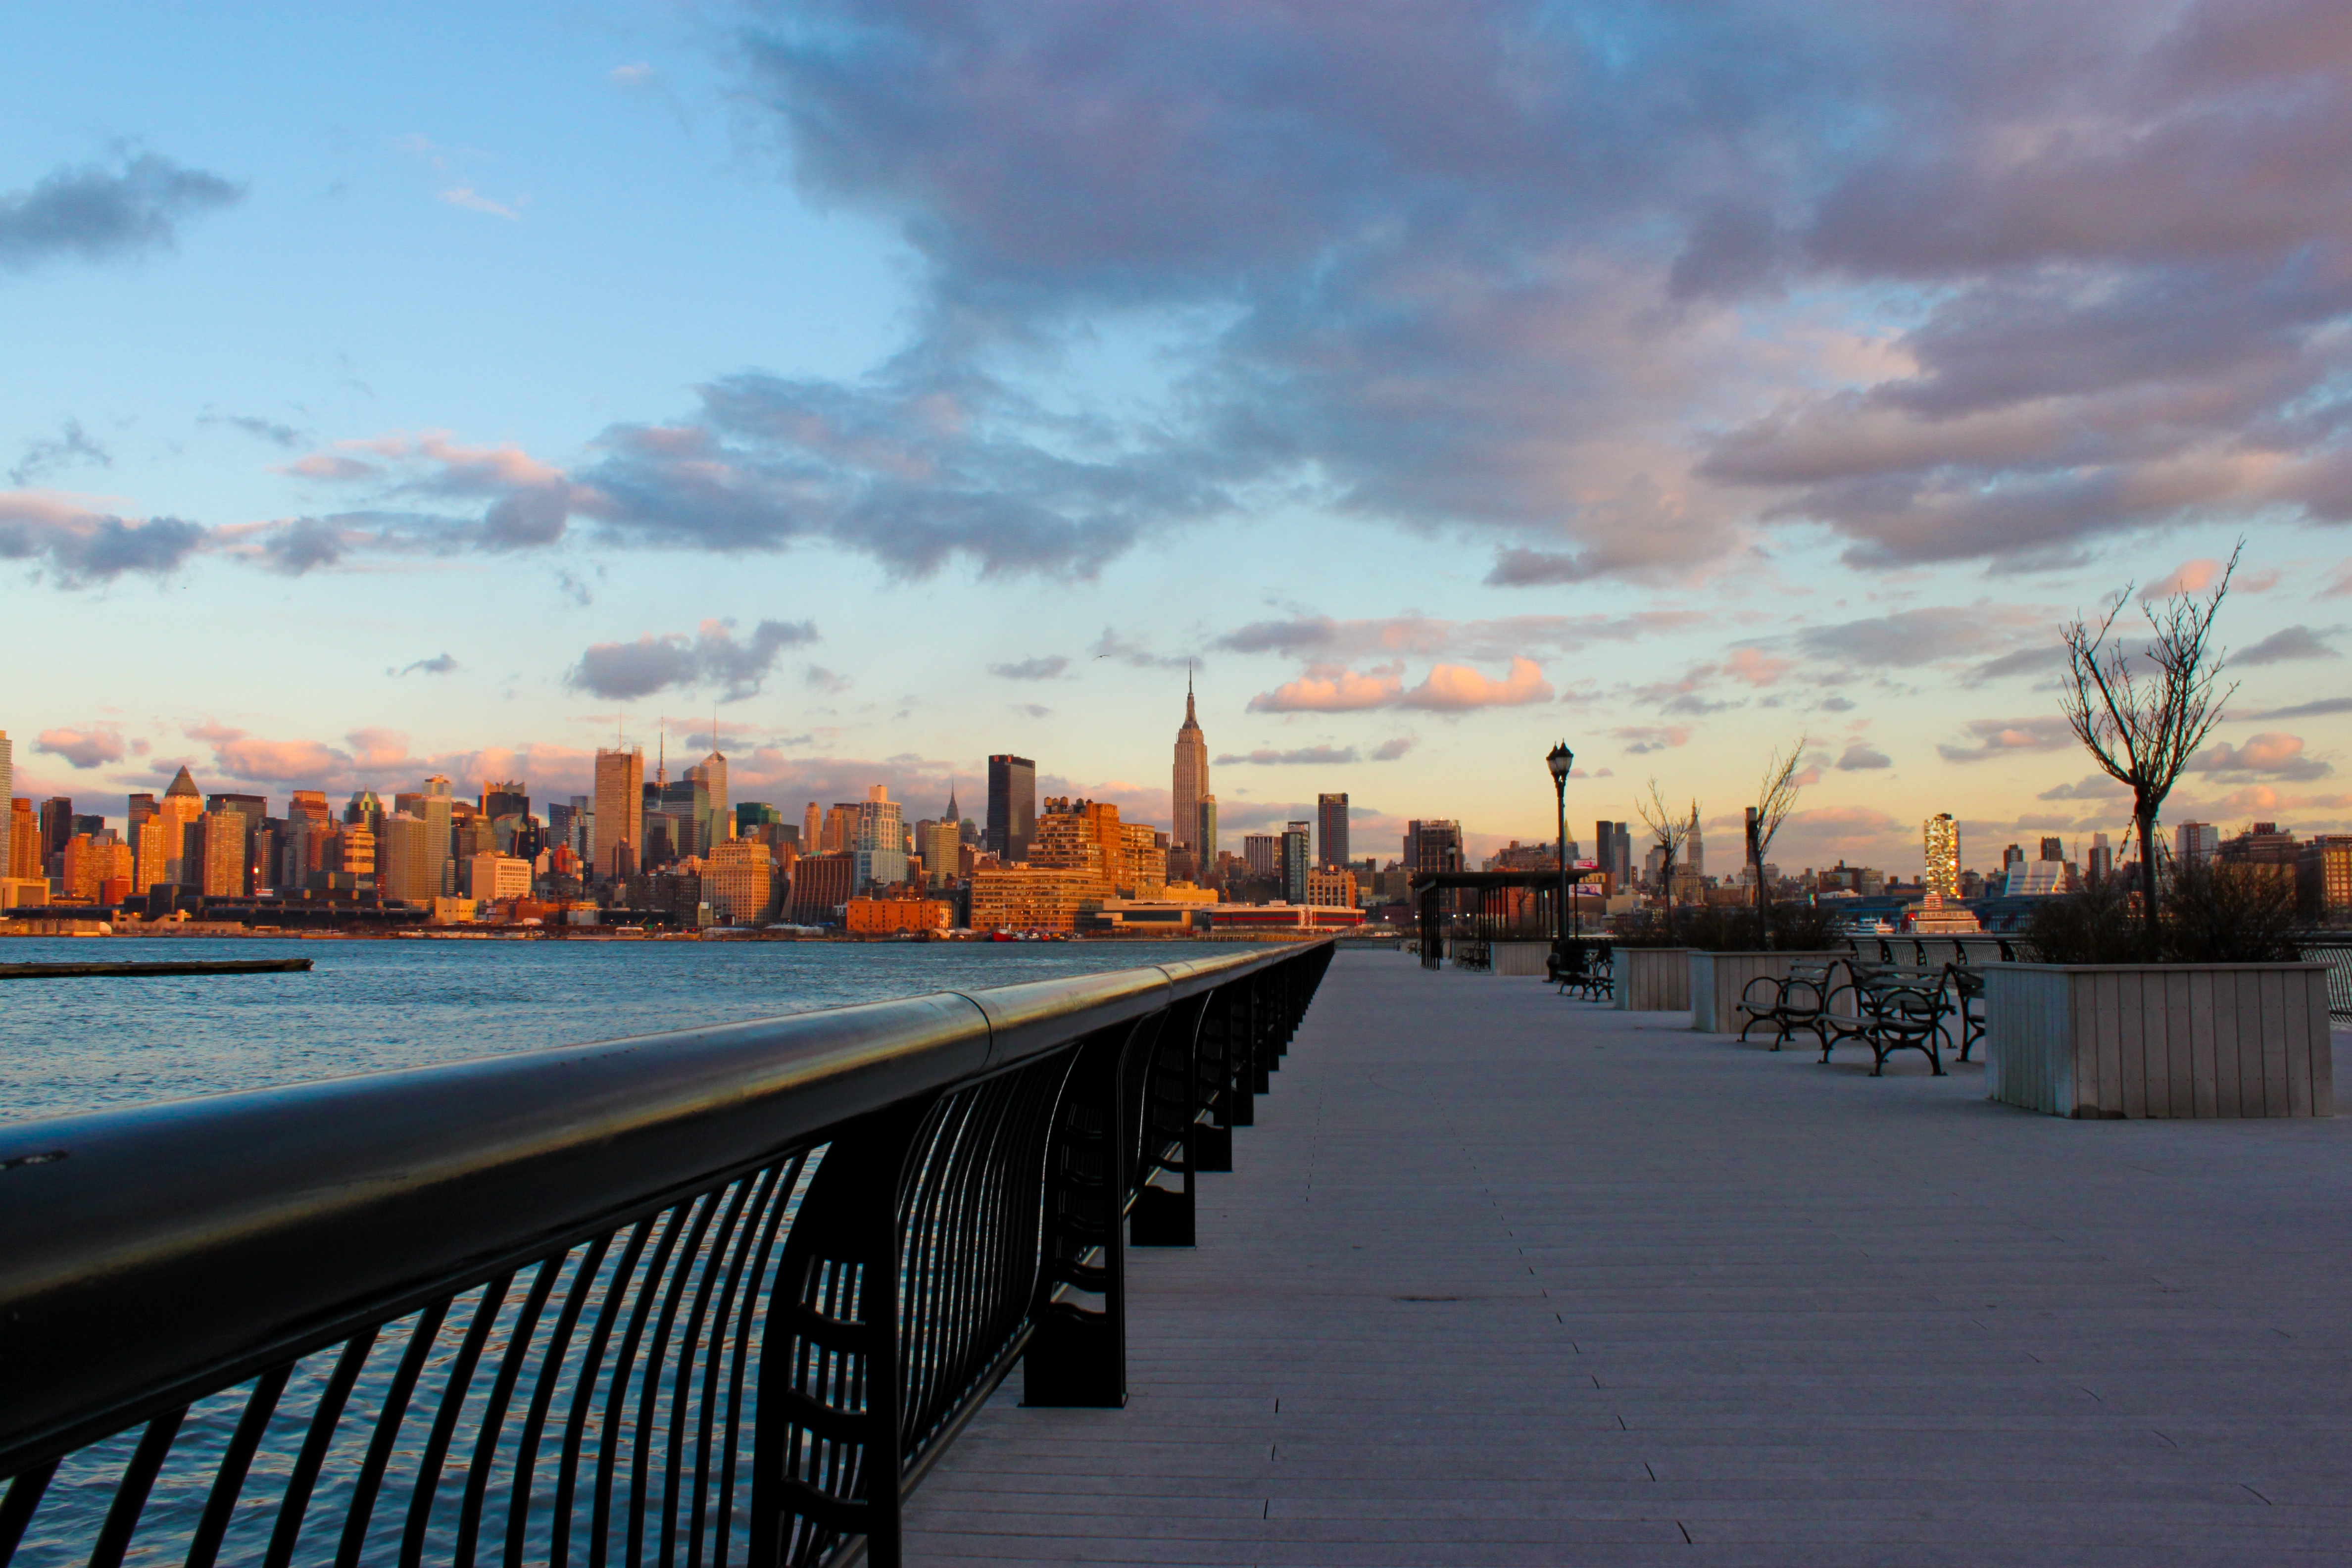 new york, cities, water, sunset, city, skyscrapers, evening, embankment, quay, ny HD for desktop 1080p